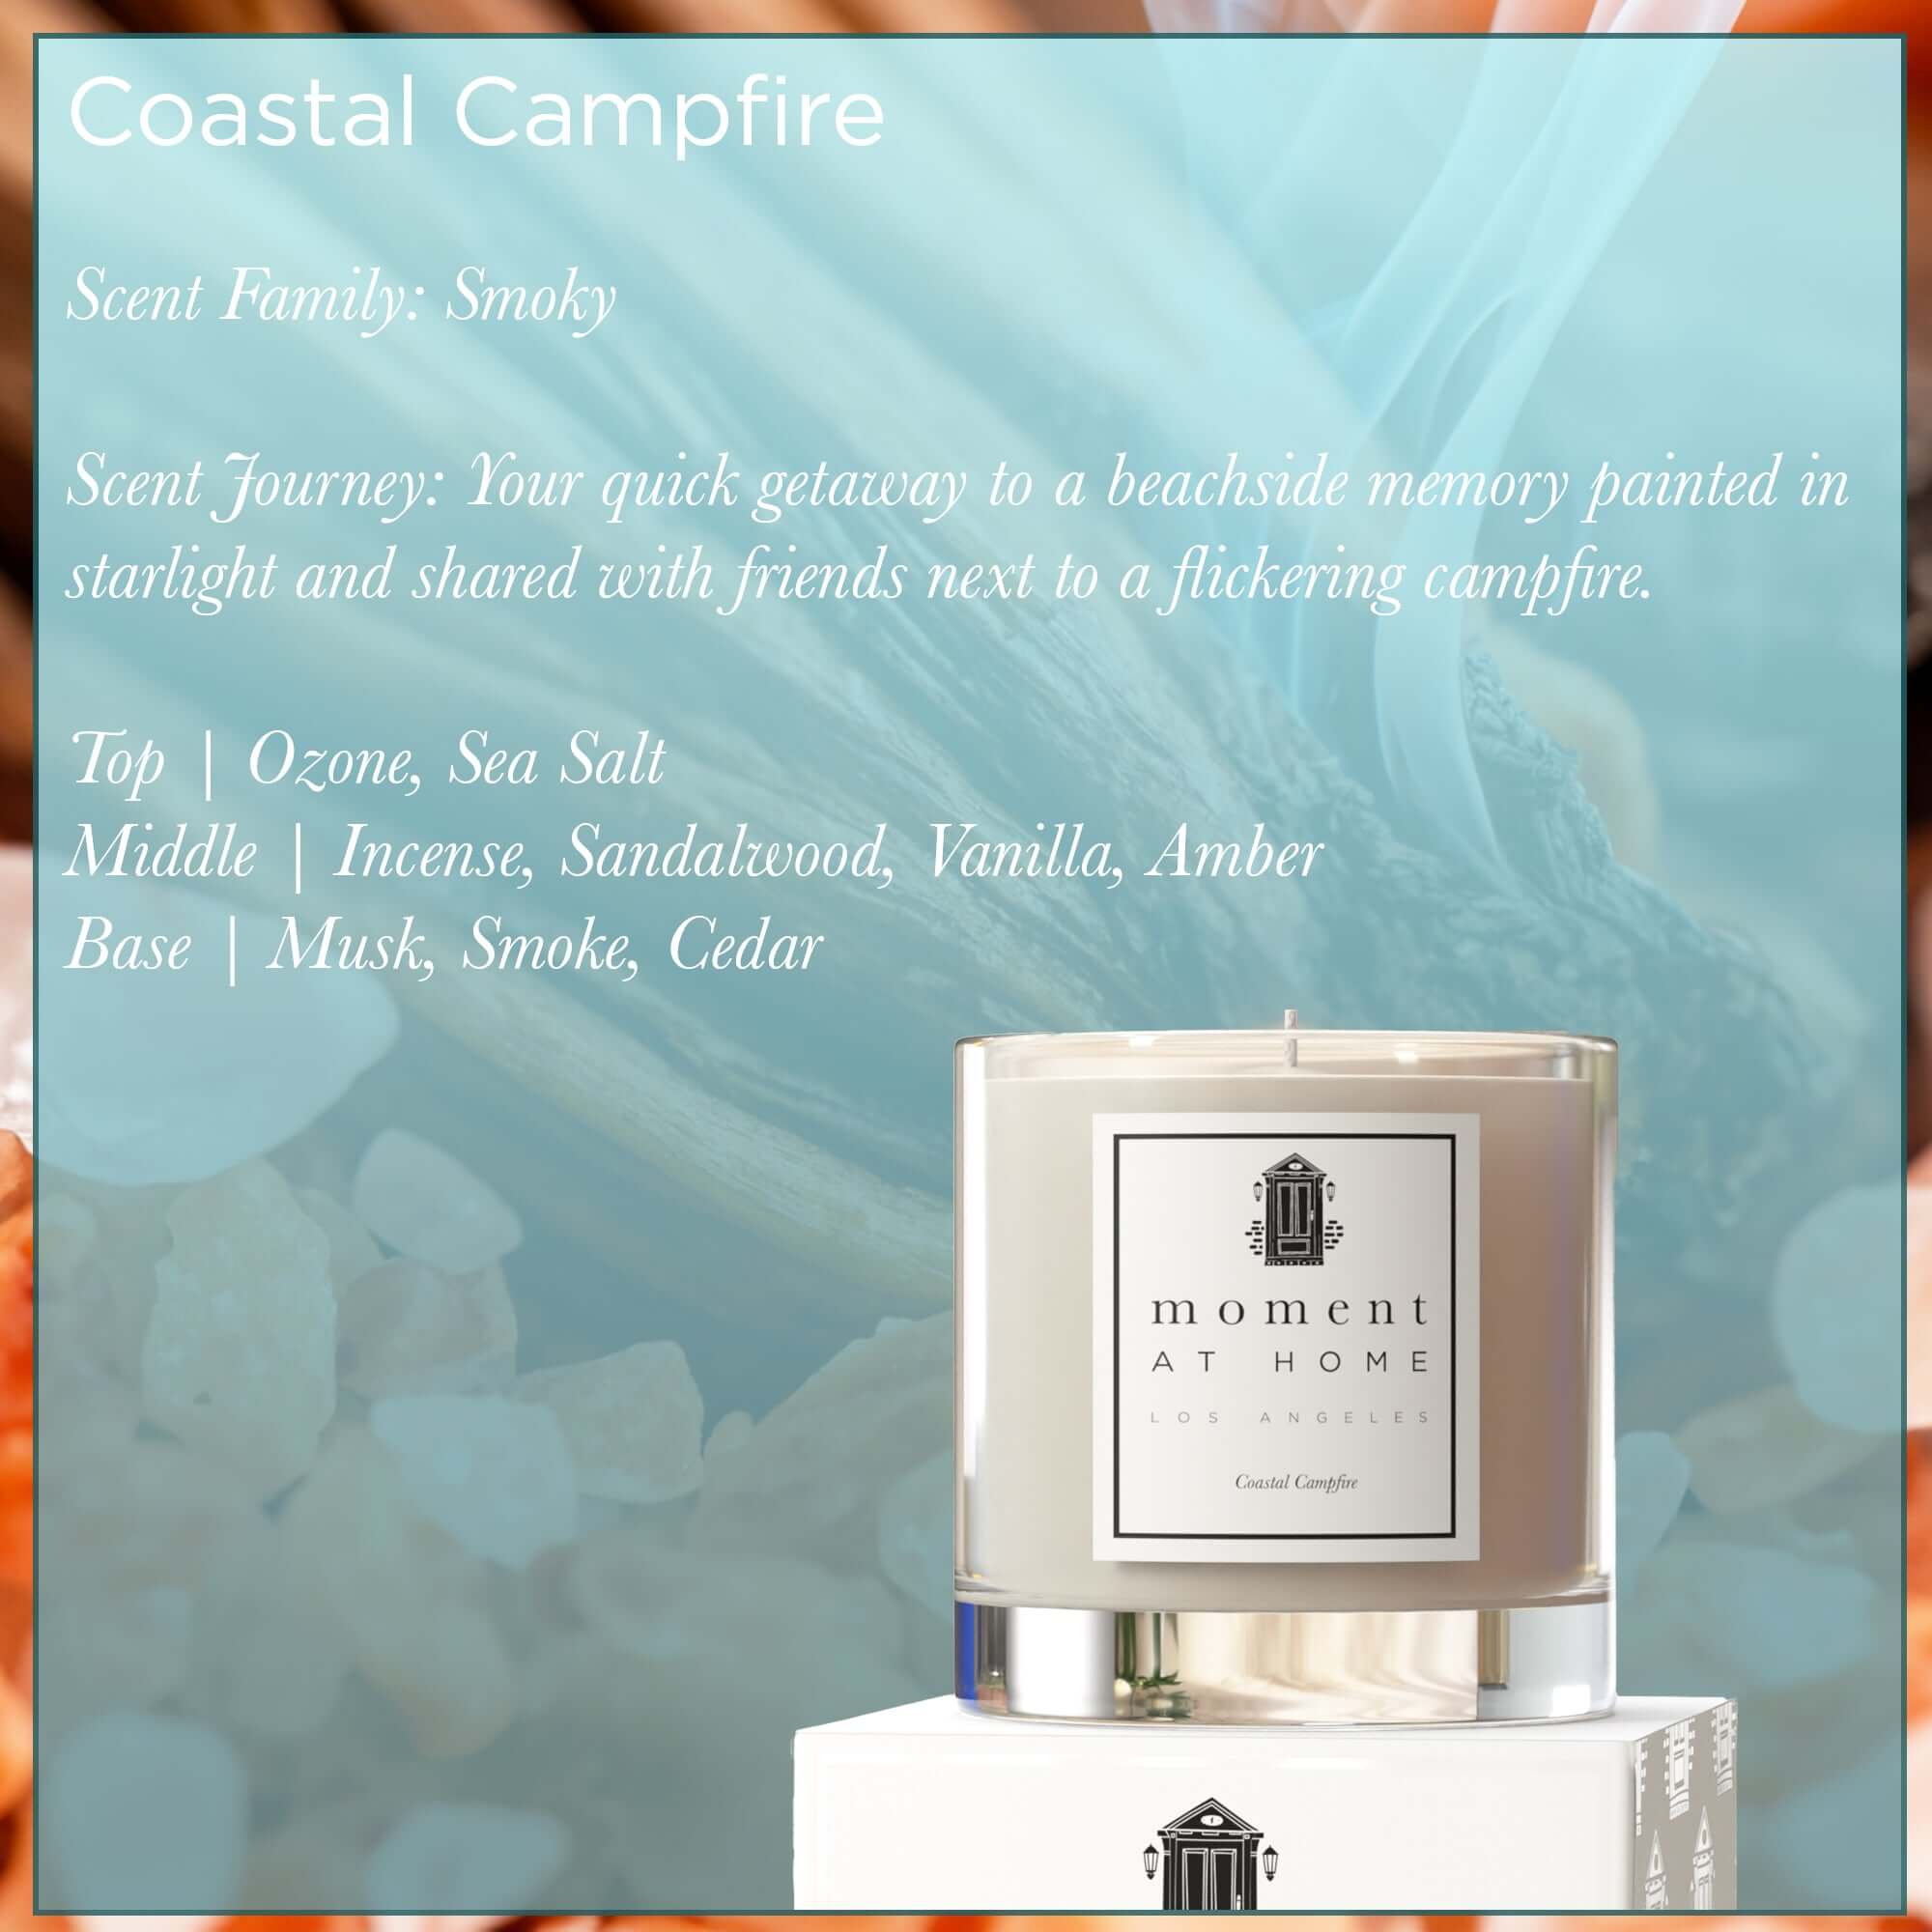 The Coastal Campfire Candle takes you on a beautiful scent journey with notes of ozone, sea salt, smoke & cedar. 